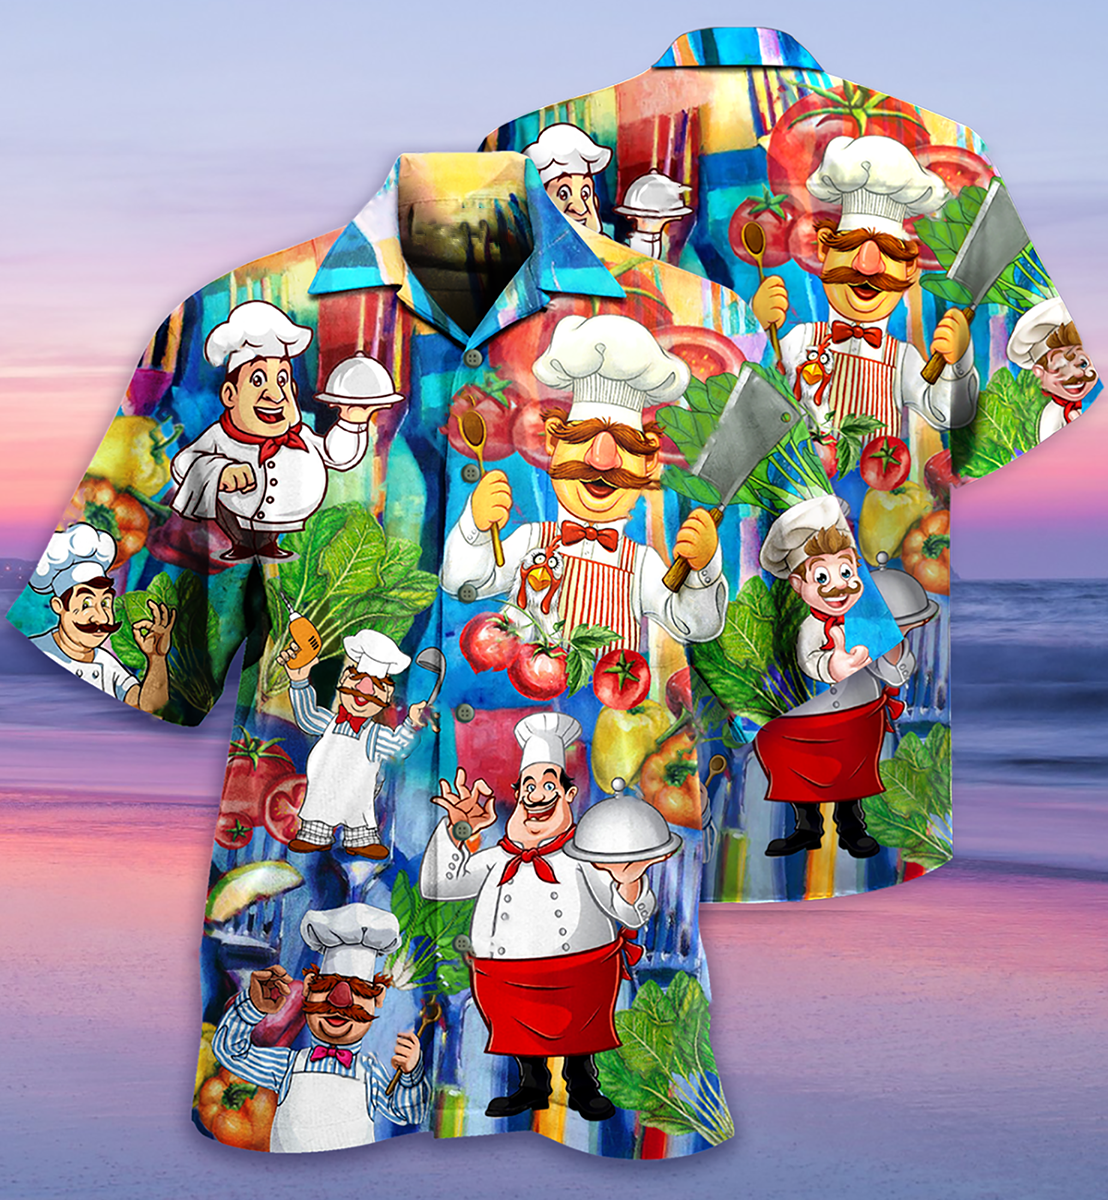 Chef Once You Put My Meat In Your Mouth You're Going To Want To Swallow - Hawaiian Shirt - Owls Matrix LTD